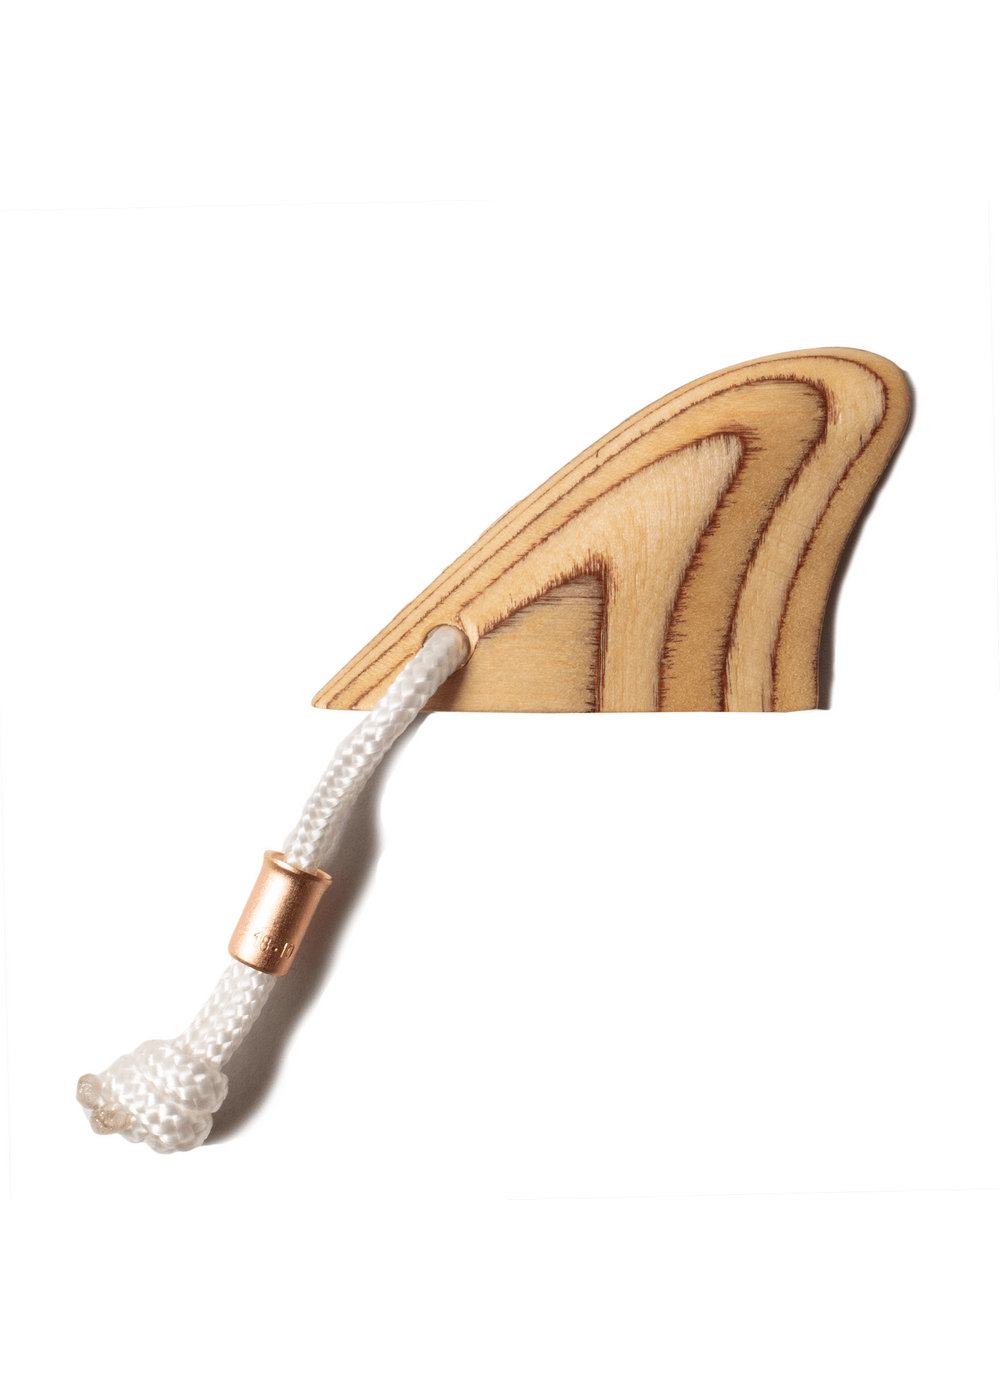 White Rope Fin Keychain with Wooden Surfboard Fin by Donald Brink